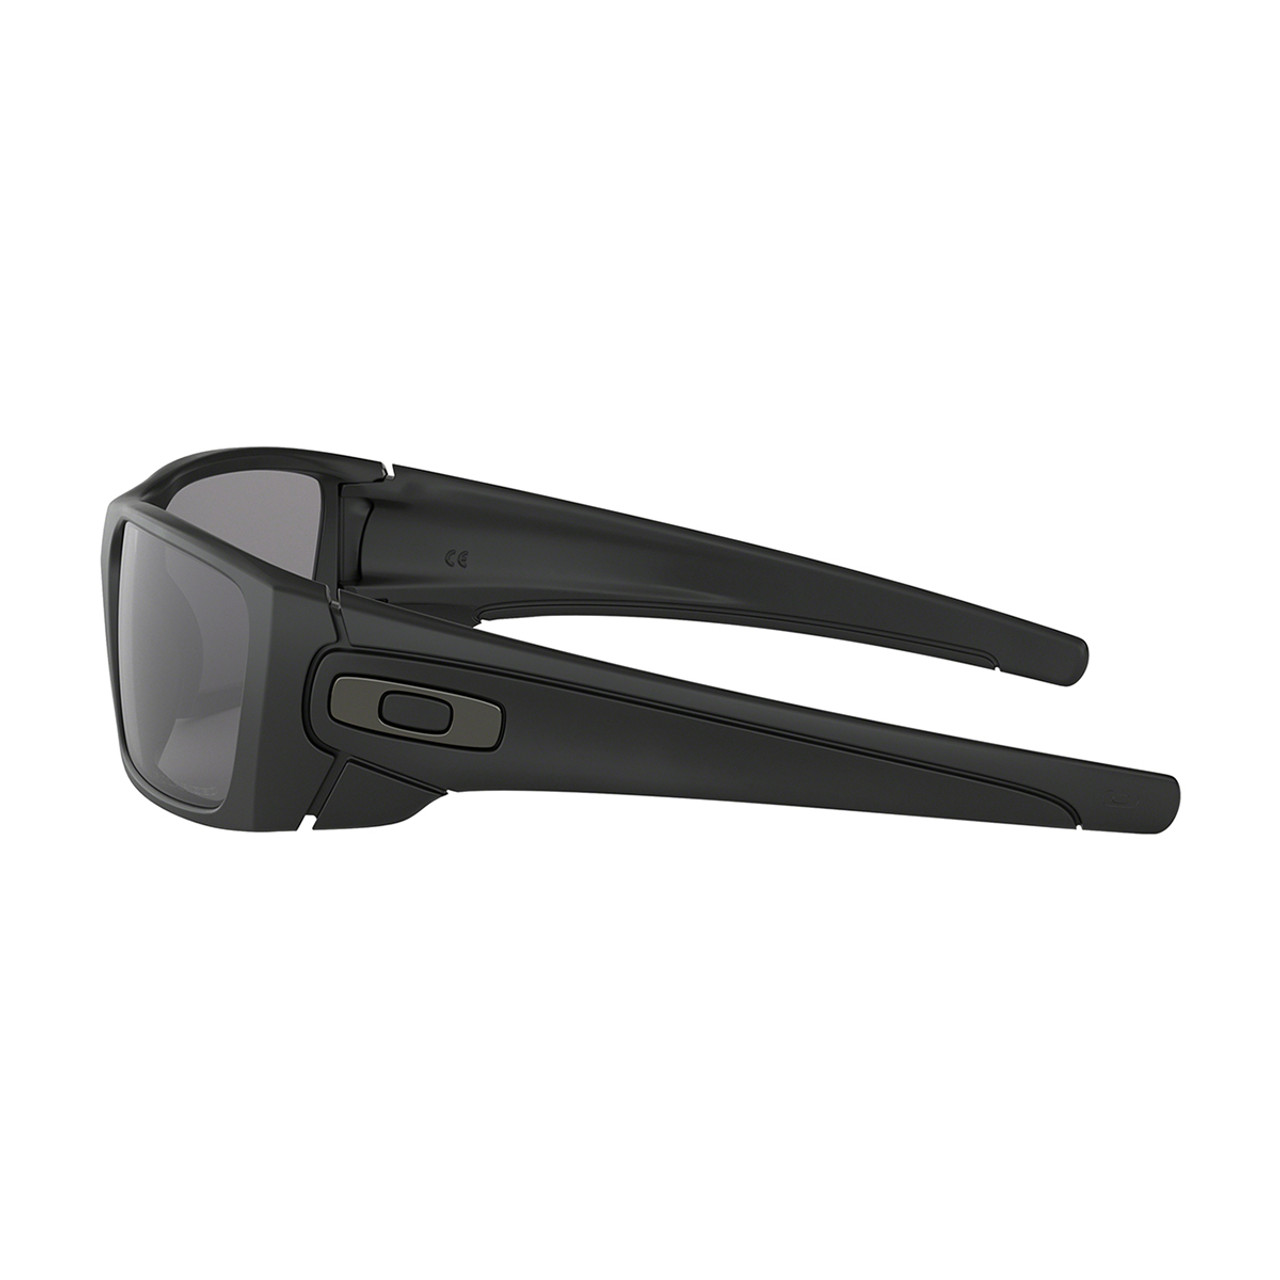 Fuel Cell - Matte Black - Grey Polarized - Val Surf